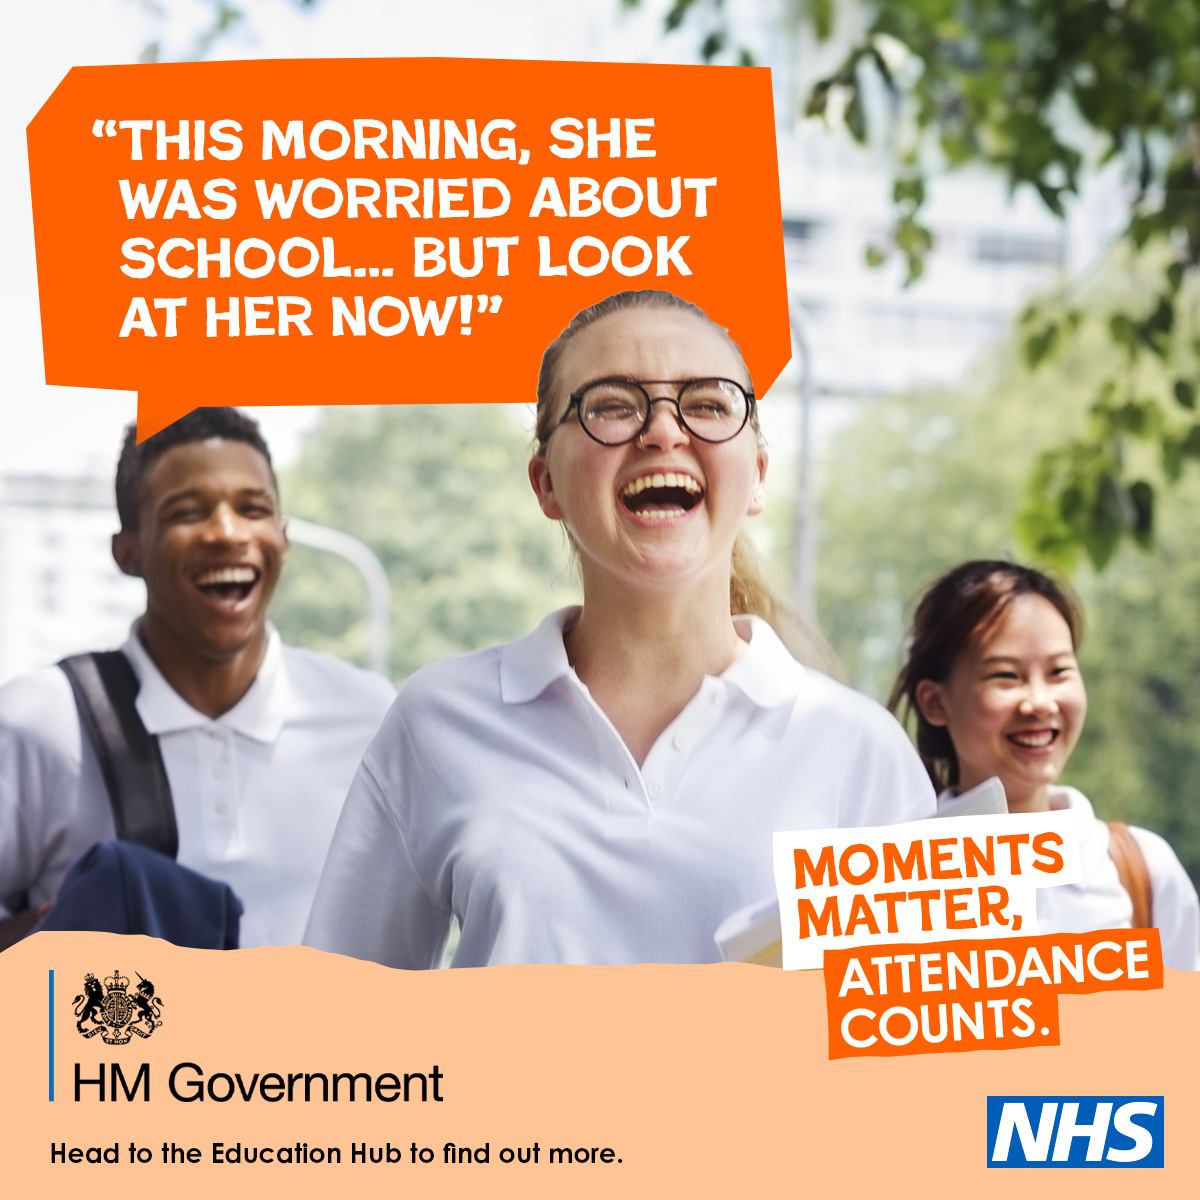 Happy #AttendanceMattersMonday from Mulberry UTC 🌟🎉 Remember that #momentsmatter and #attendancecounts, even if you find yourself dealing with some nerves this exams season! 🫤  Don't miss out on any of the critical learning that this week is sure to bring! 😁@nhs